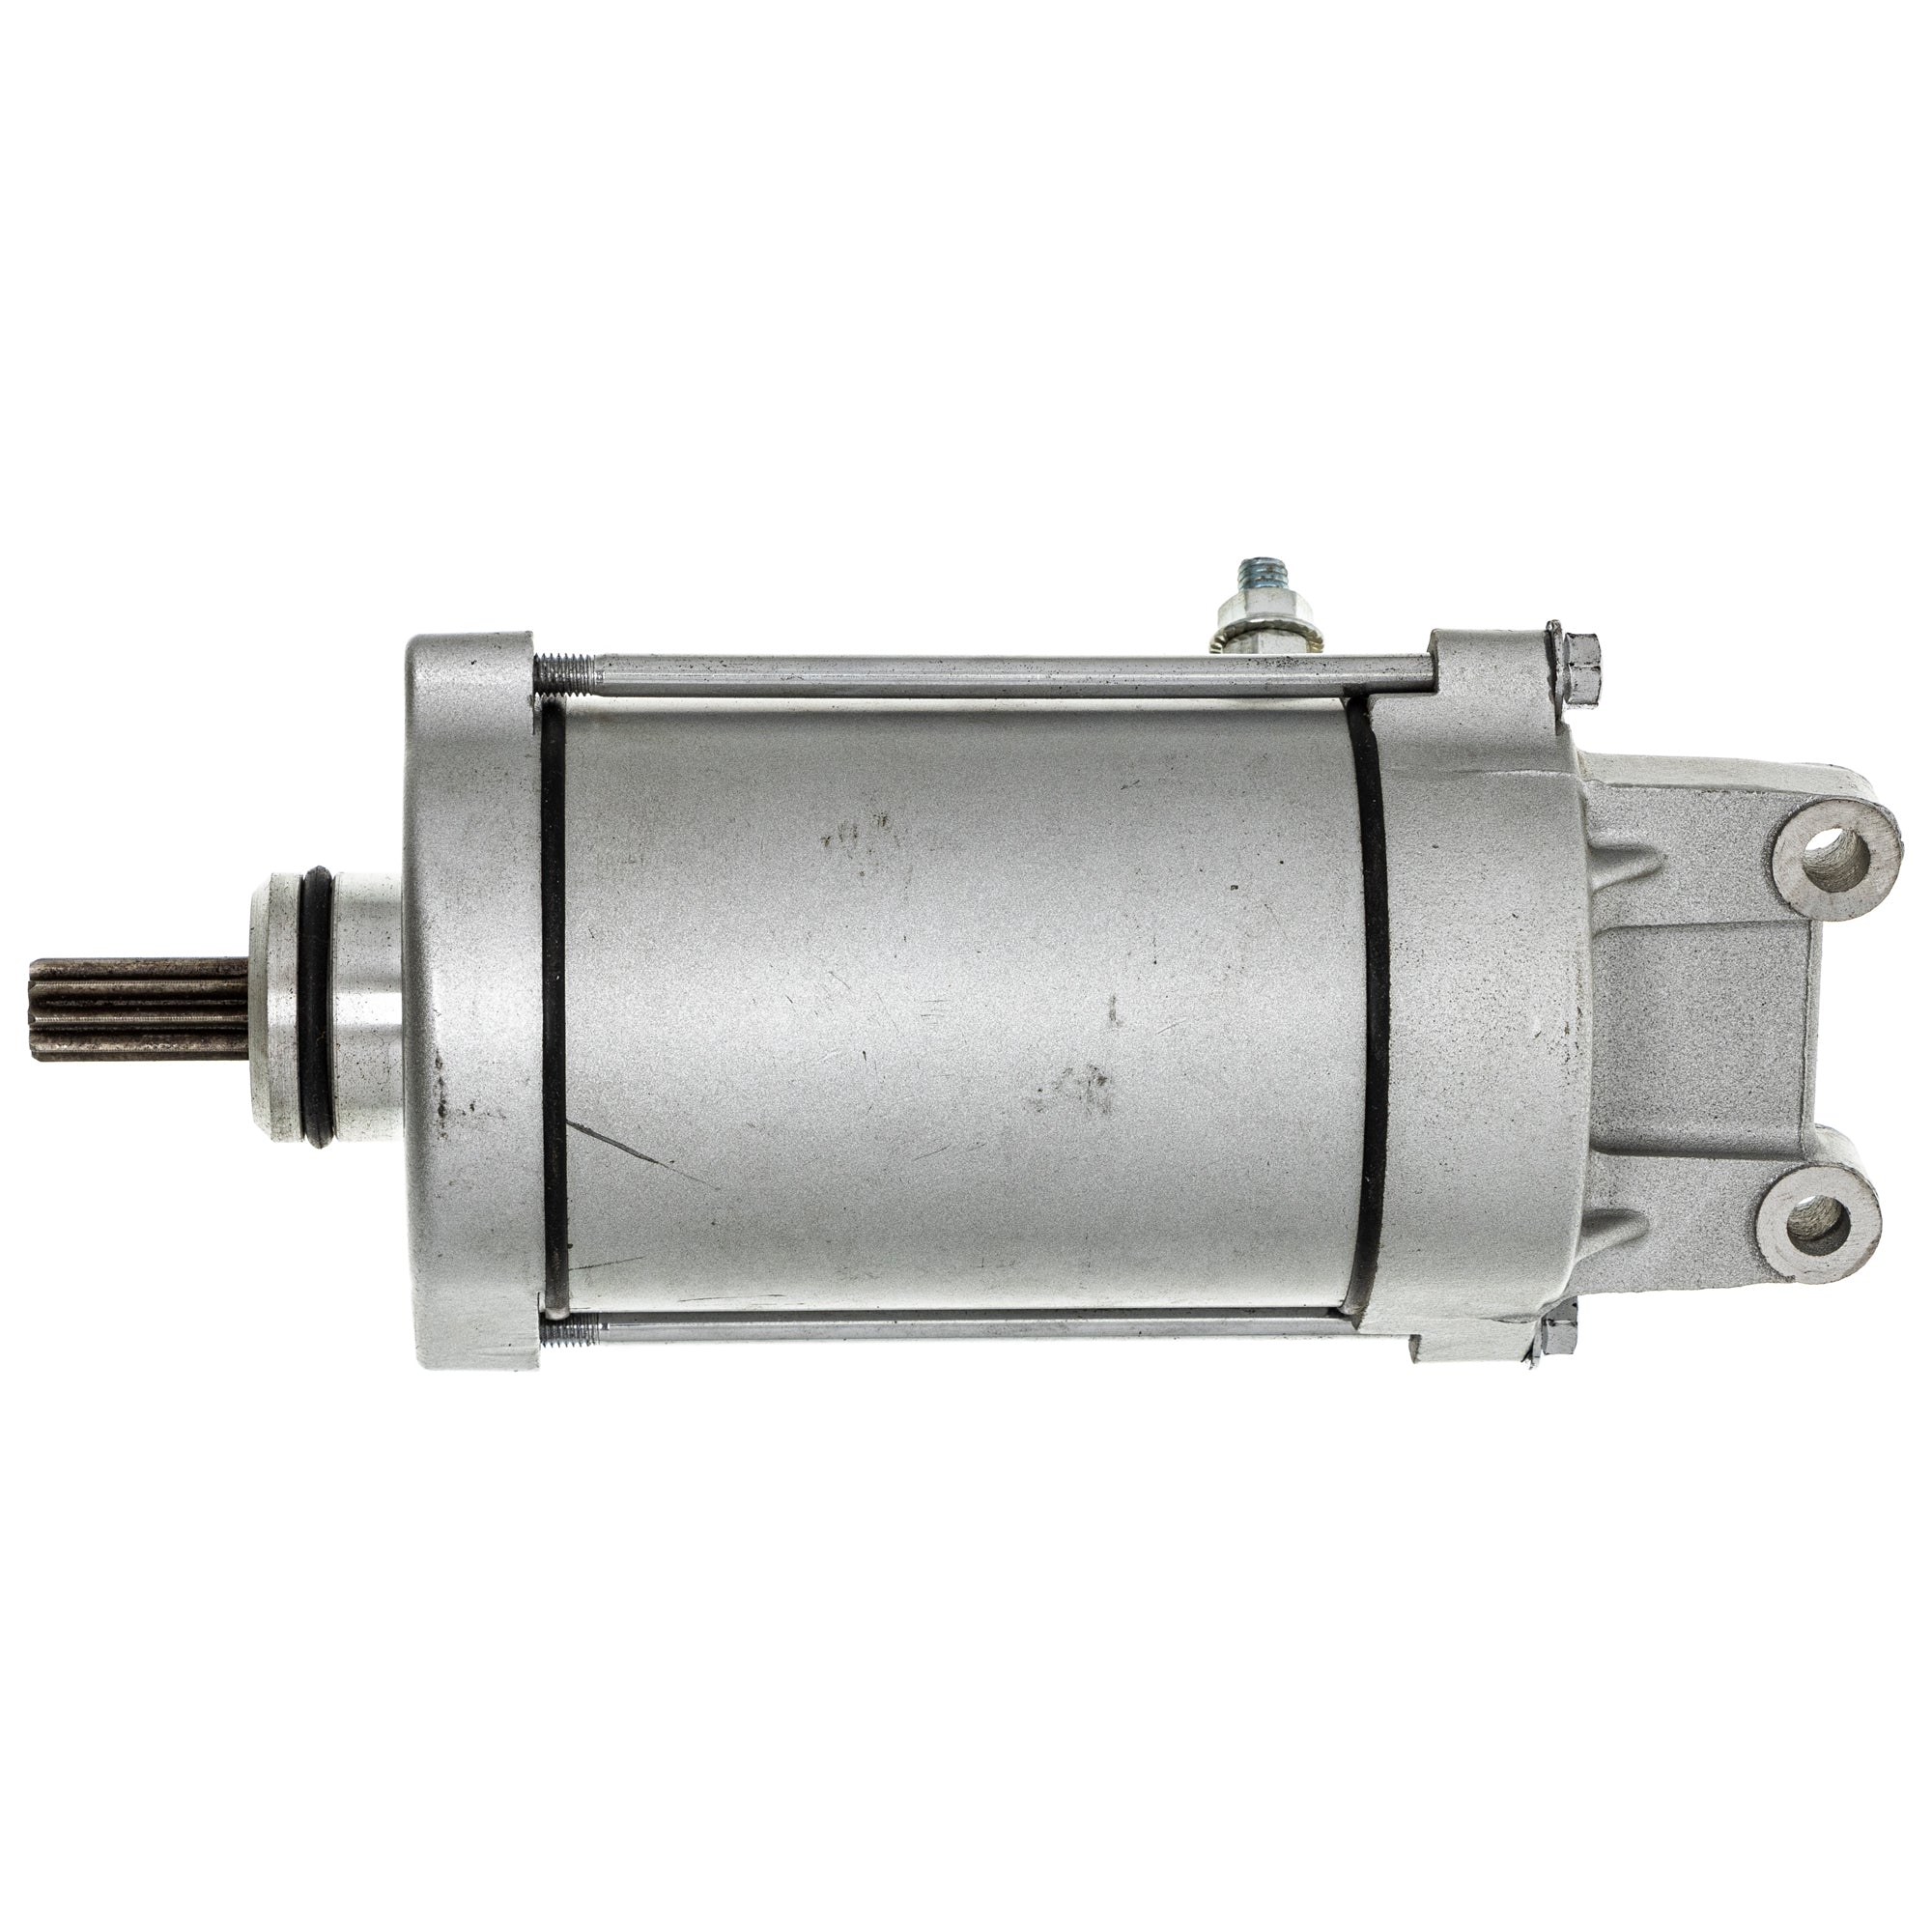 NICHE 519-CSM2386O Starter Motor Assembly for zOTHER VTX1800T